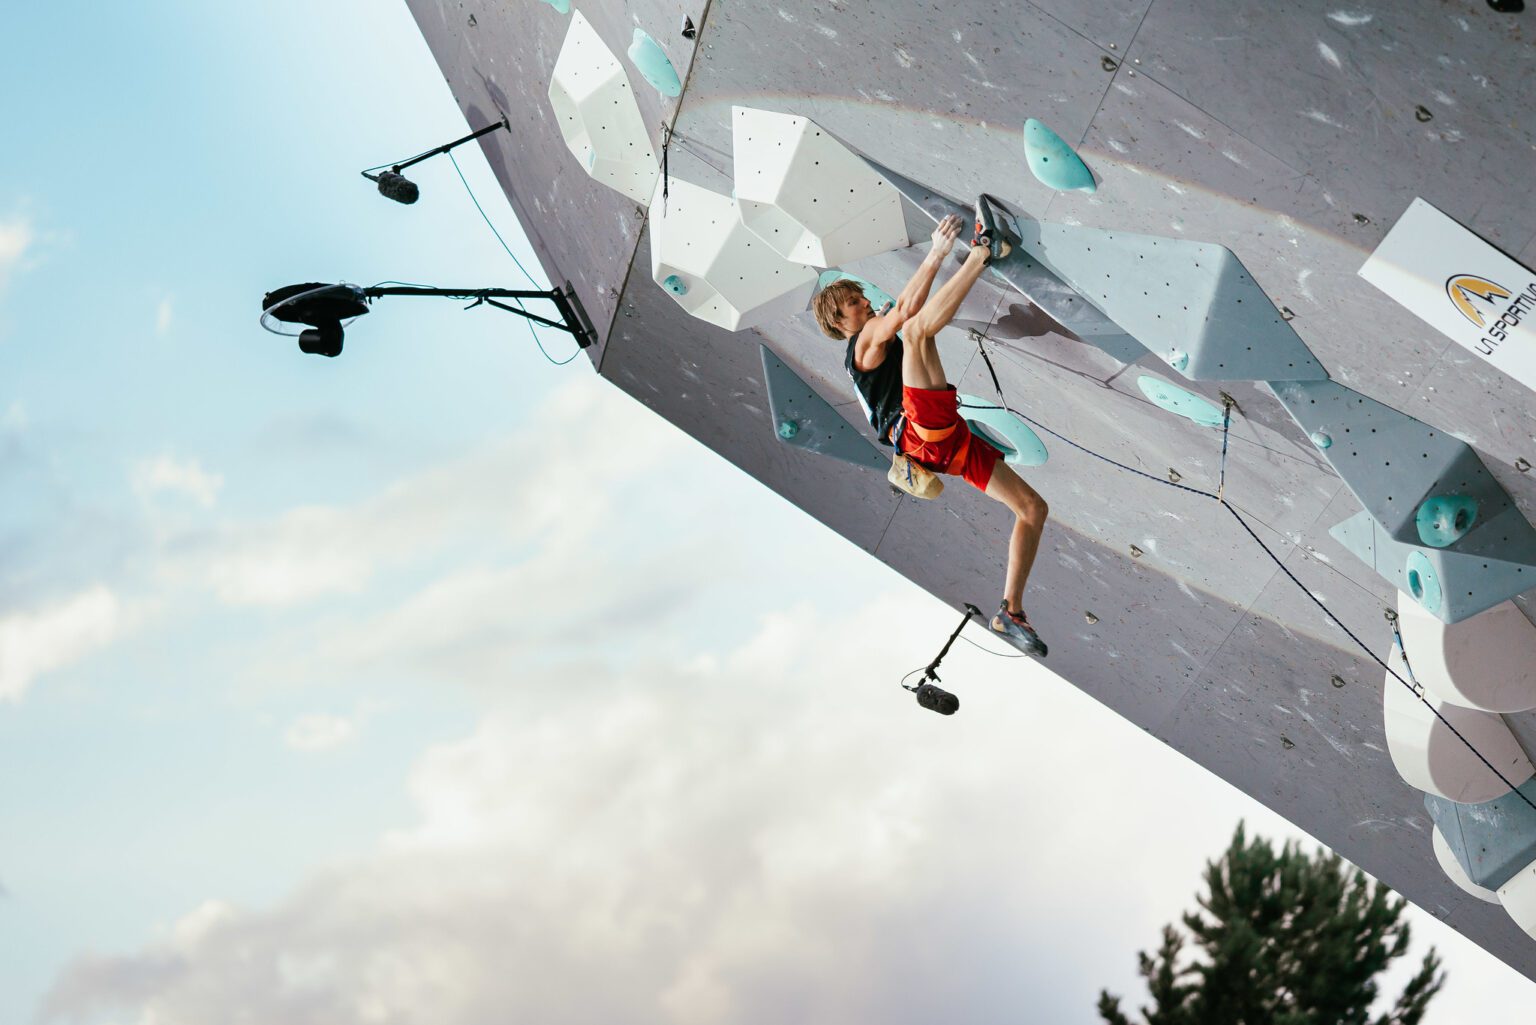 The IFSC Releases Paris 2024 Olympic Schedule - Gripped Magazine